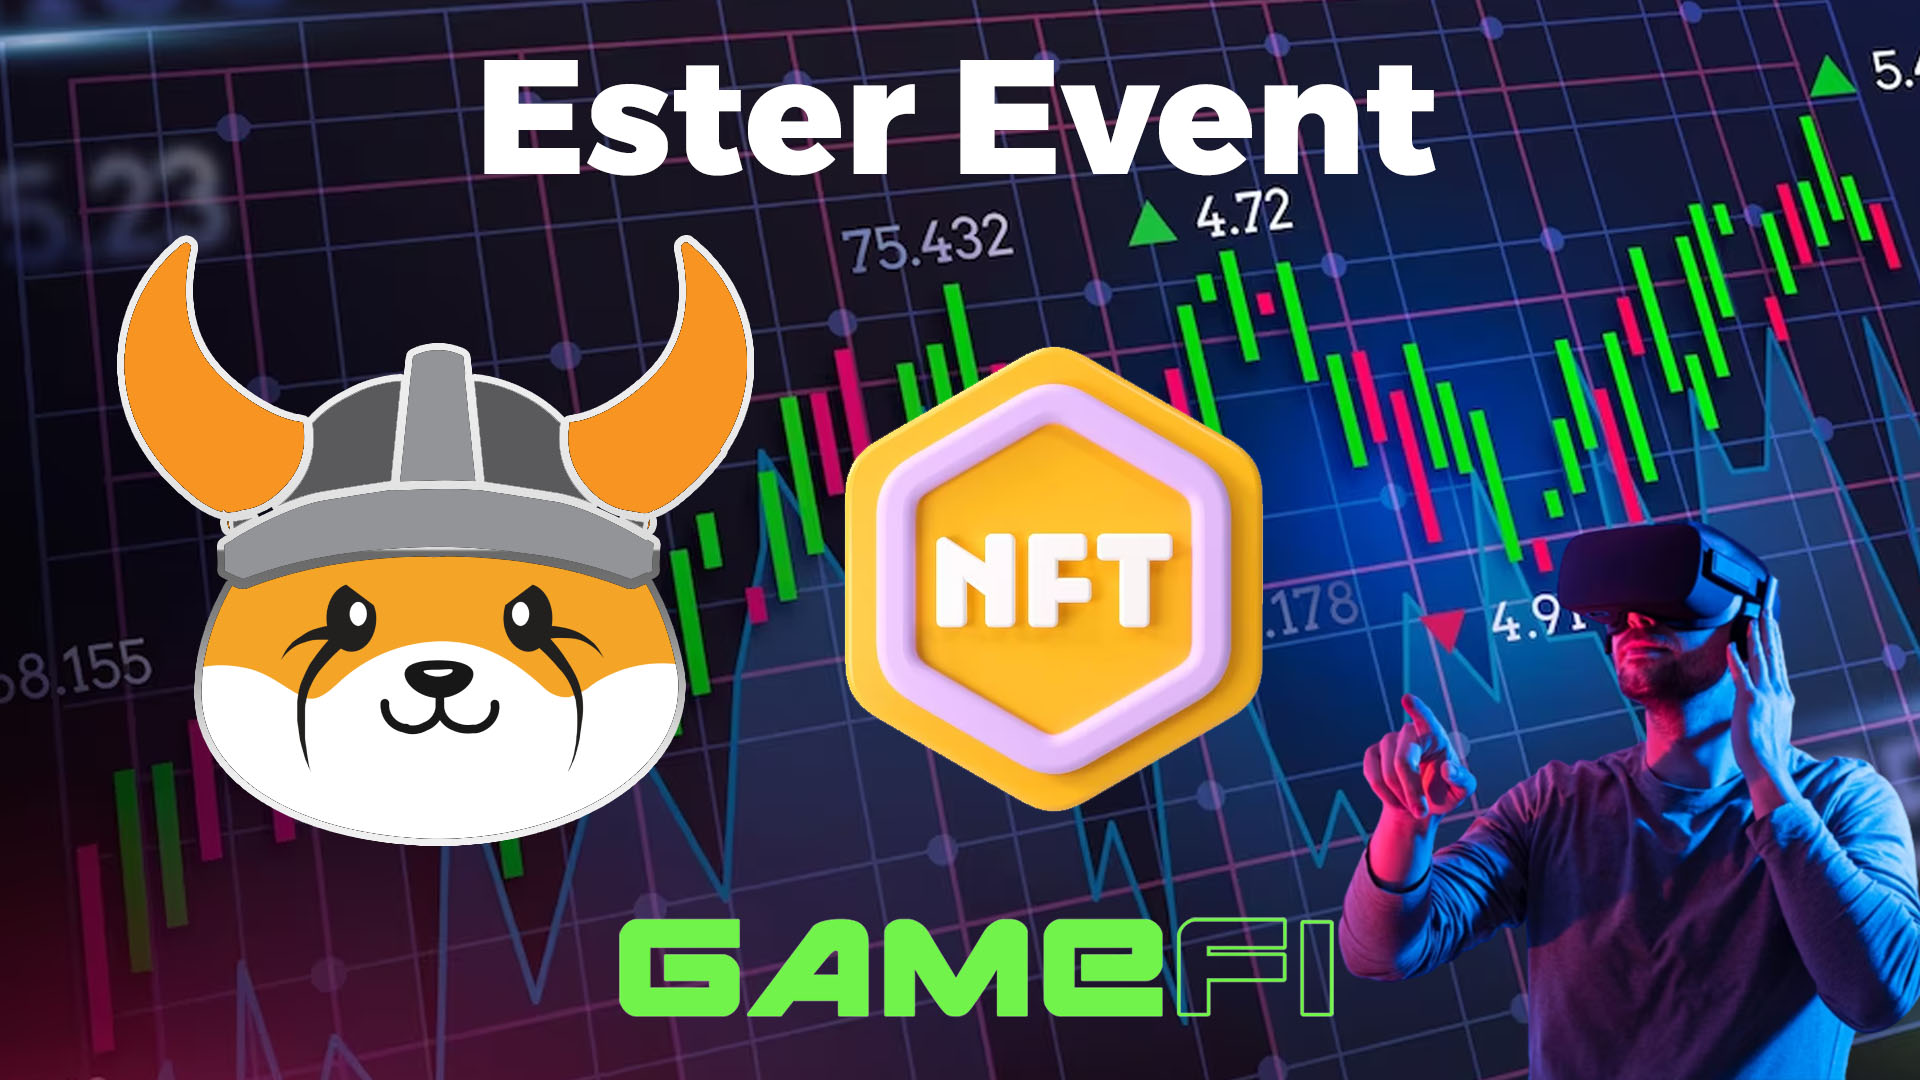 Easter Event